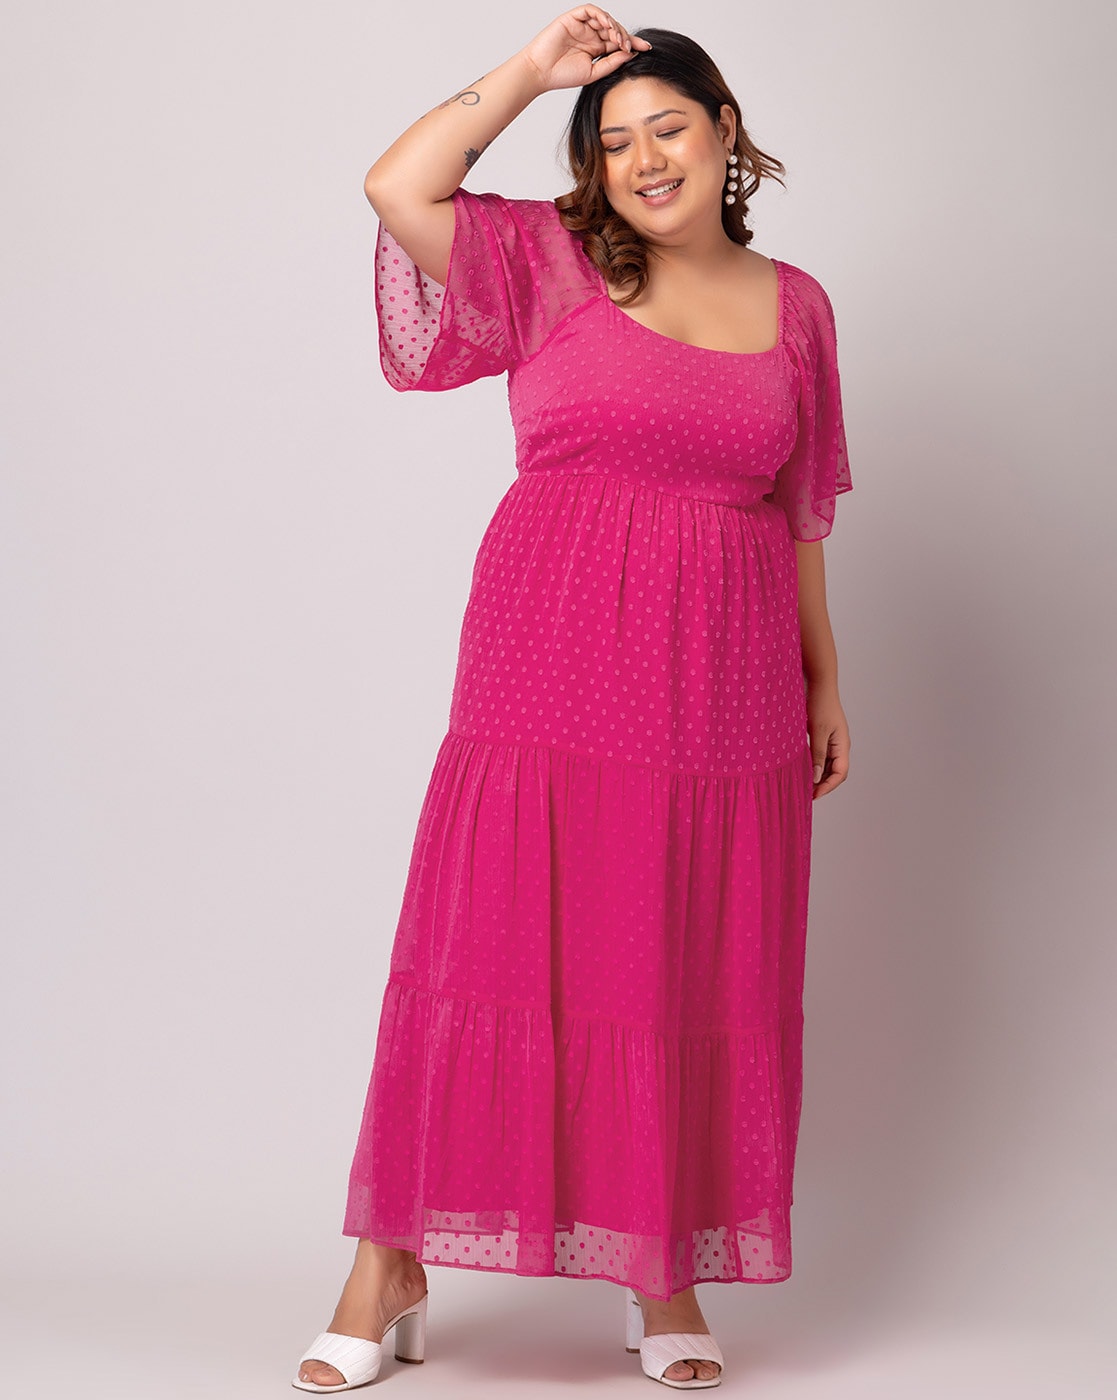 Plus Size Dresses - Buy Plus Size Dresses Online for Women in India -  FabAlley